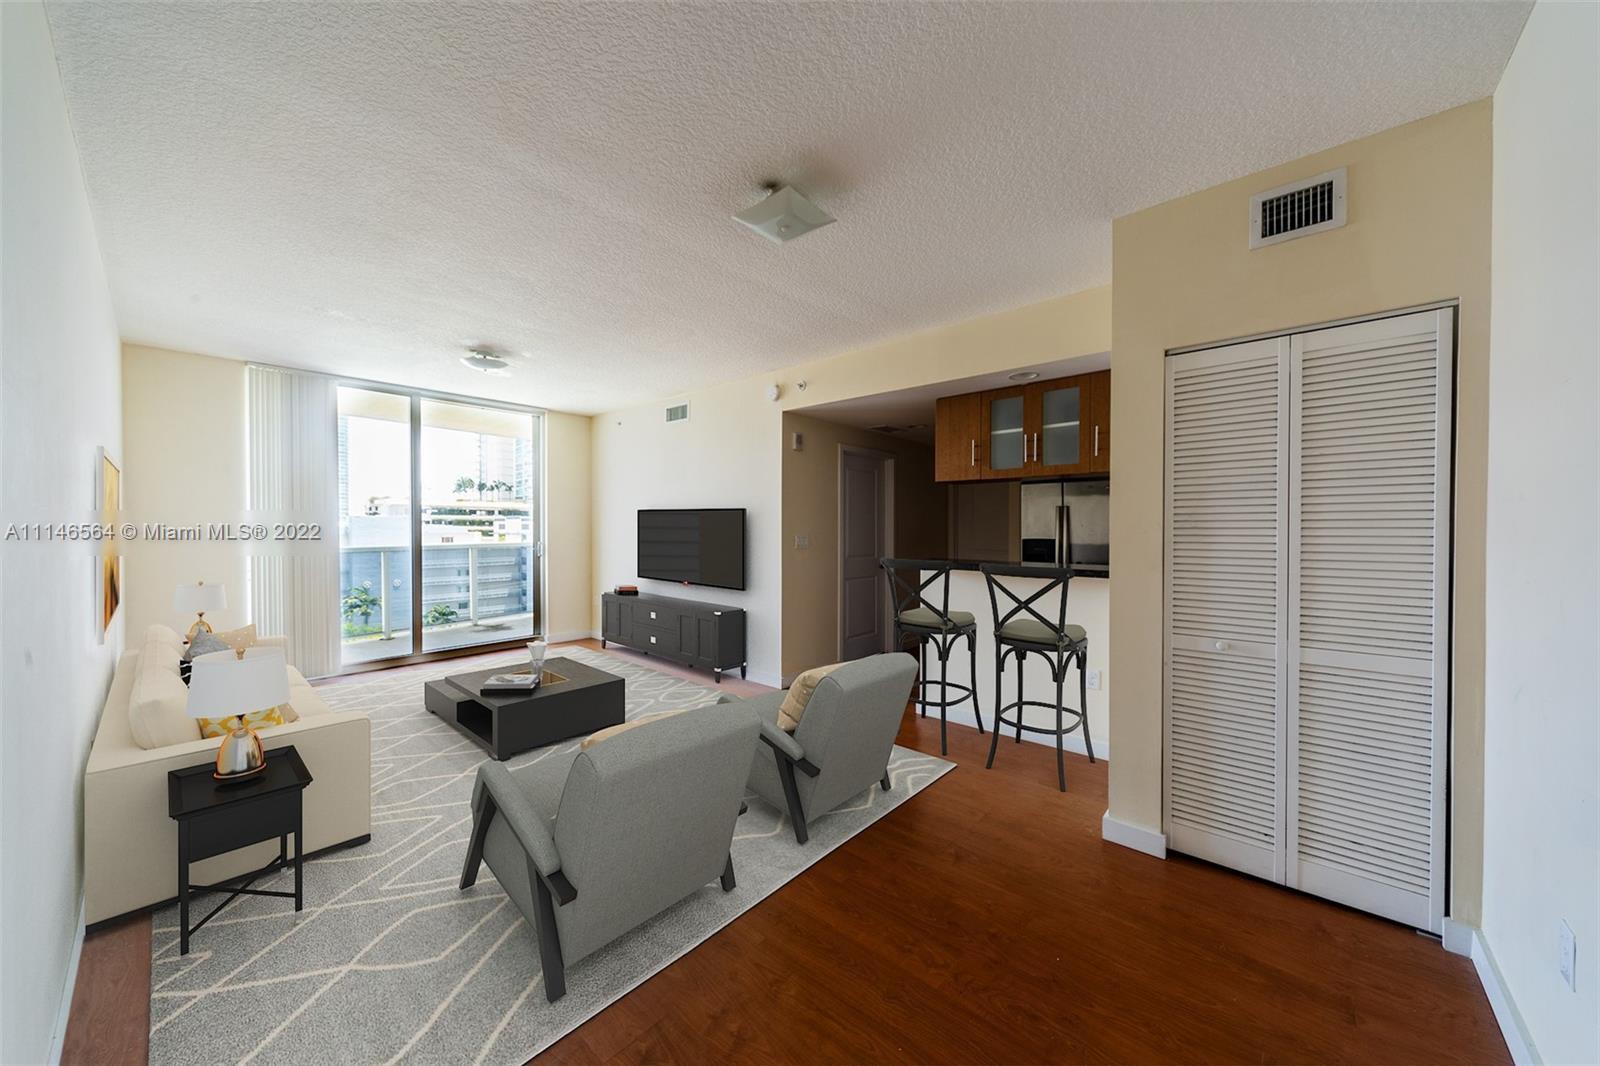 Best location in Edgewater, 23 Biscayne Condo, immaculate 1-1 apartment with new floors, easy to show, won't last!